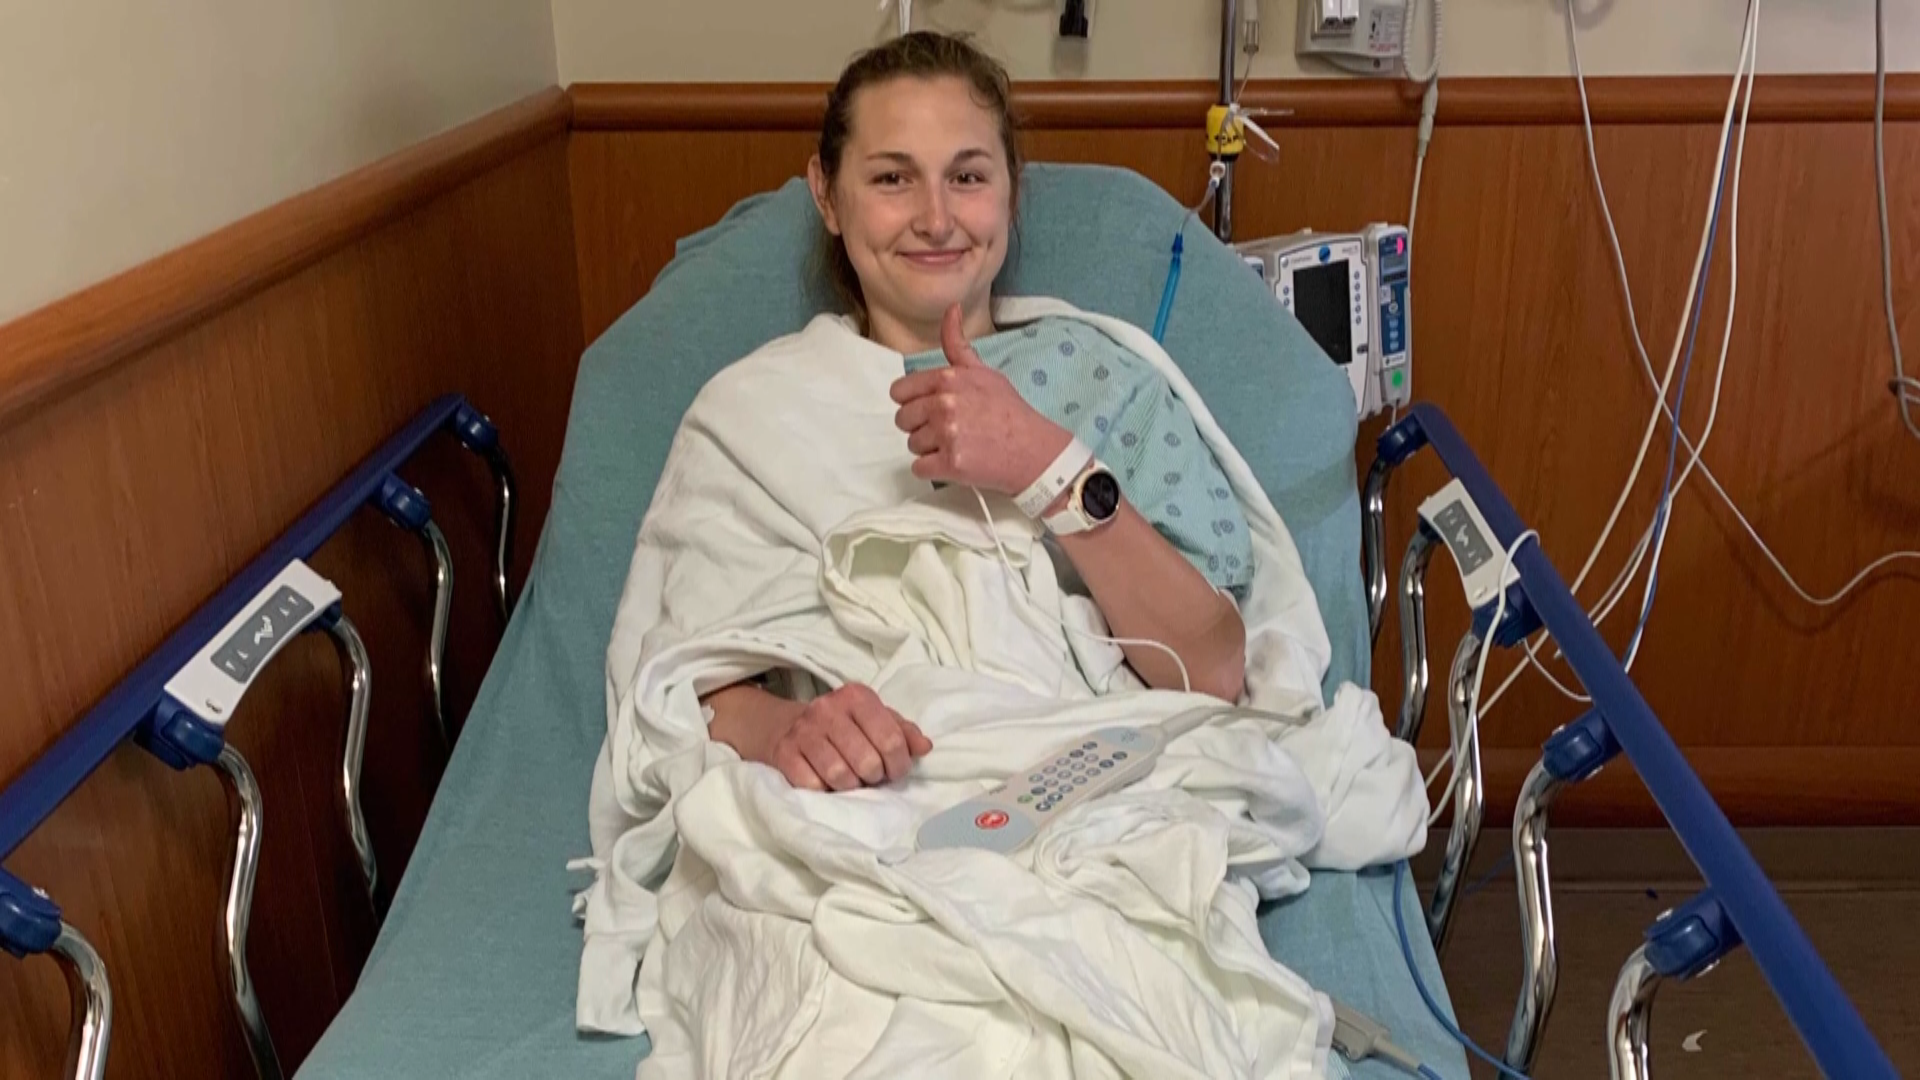 Allex Brown collapsed during the Glass City Marathon and doctors diagnosed her with myocarditis.